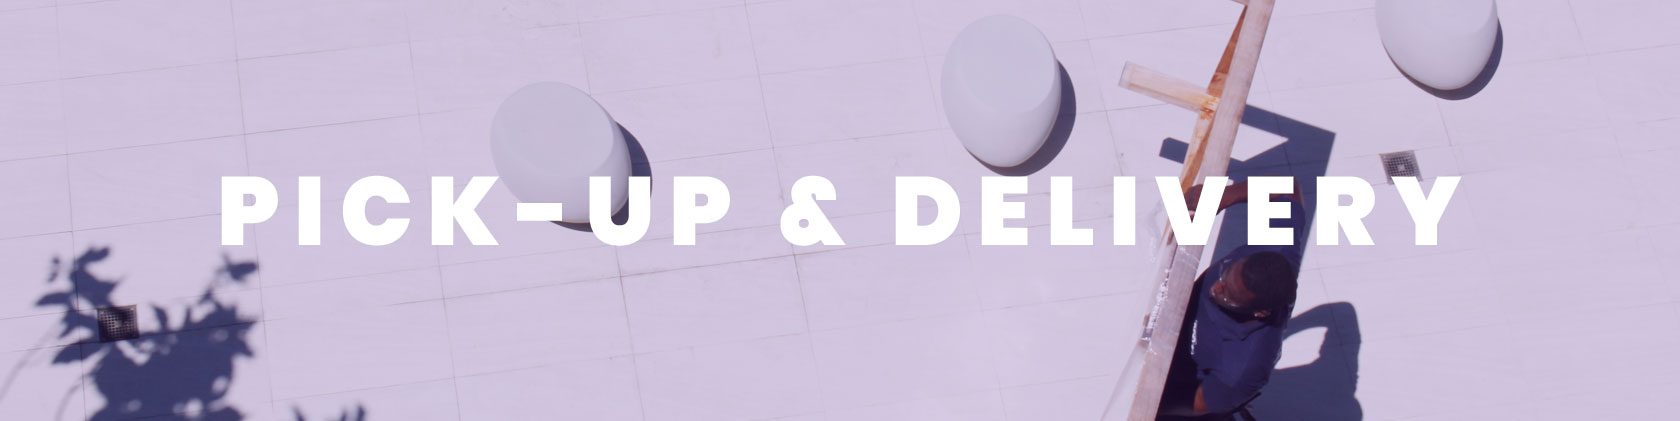 pick-up and delivery services for designers